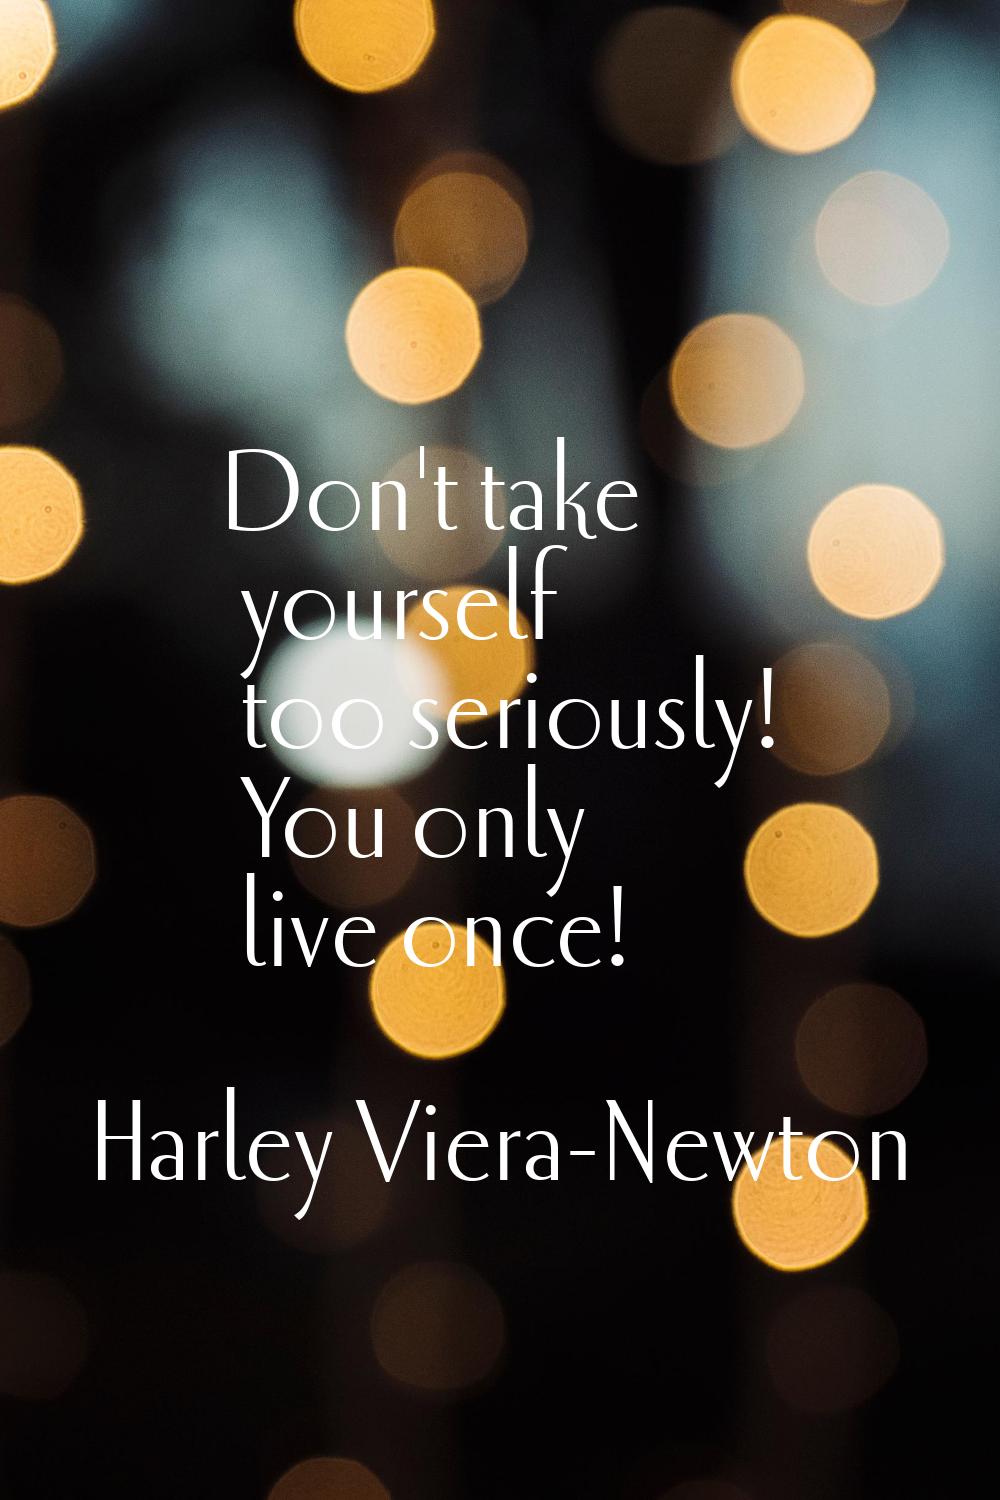 Don't take yourself too seriously! You only live once!